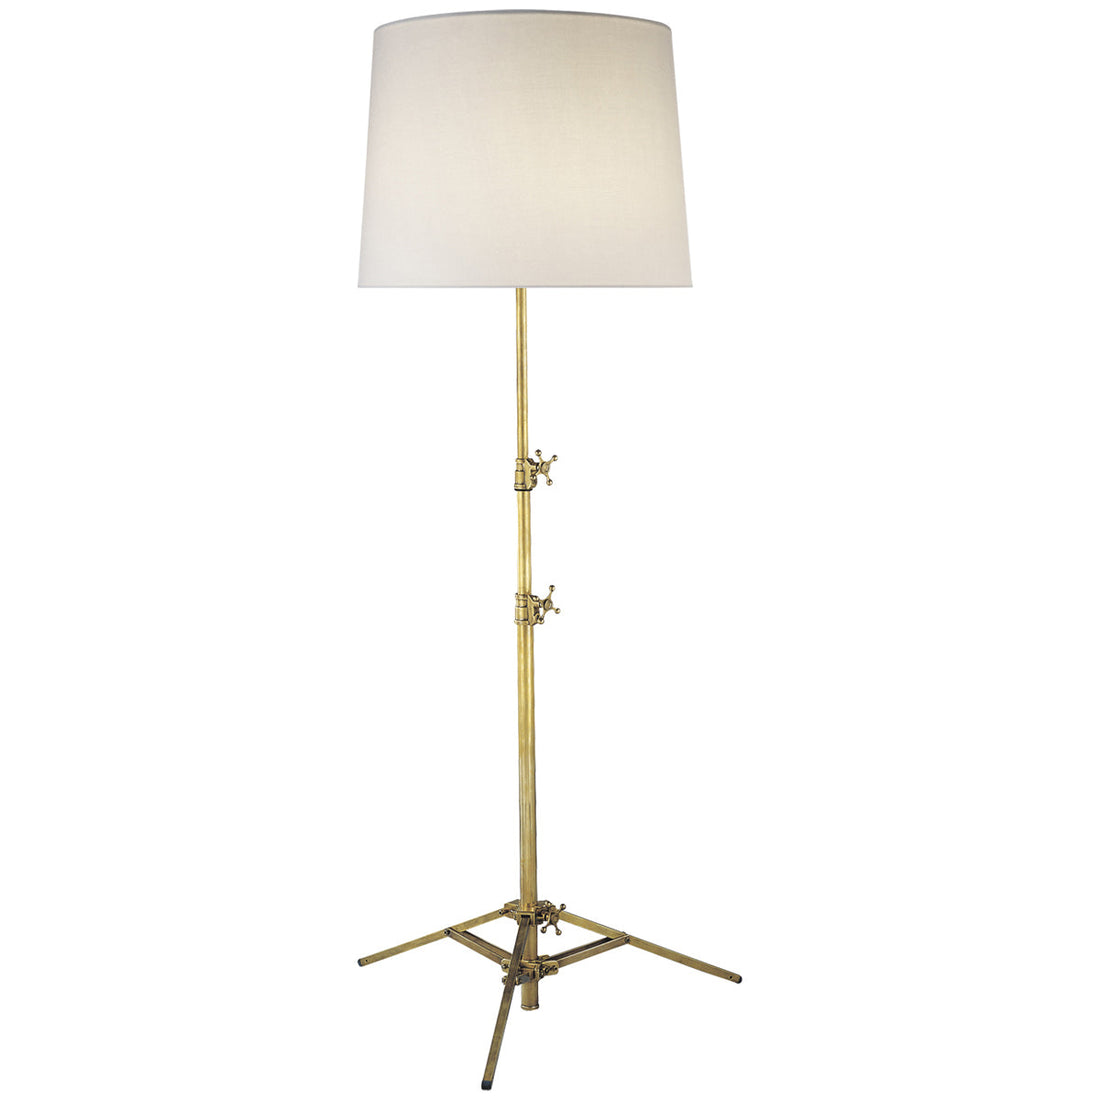 Thomas O'Brien Longacre Small Table Lamp in Hand-Rubbed Antique Brass